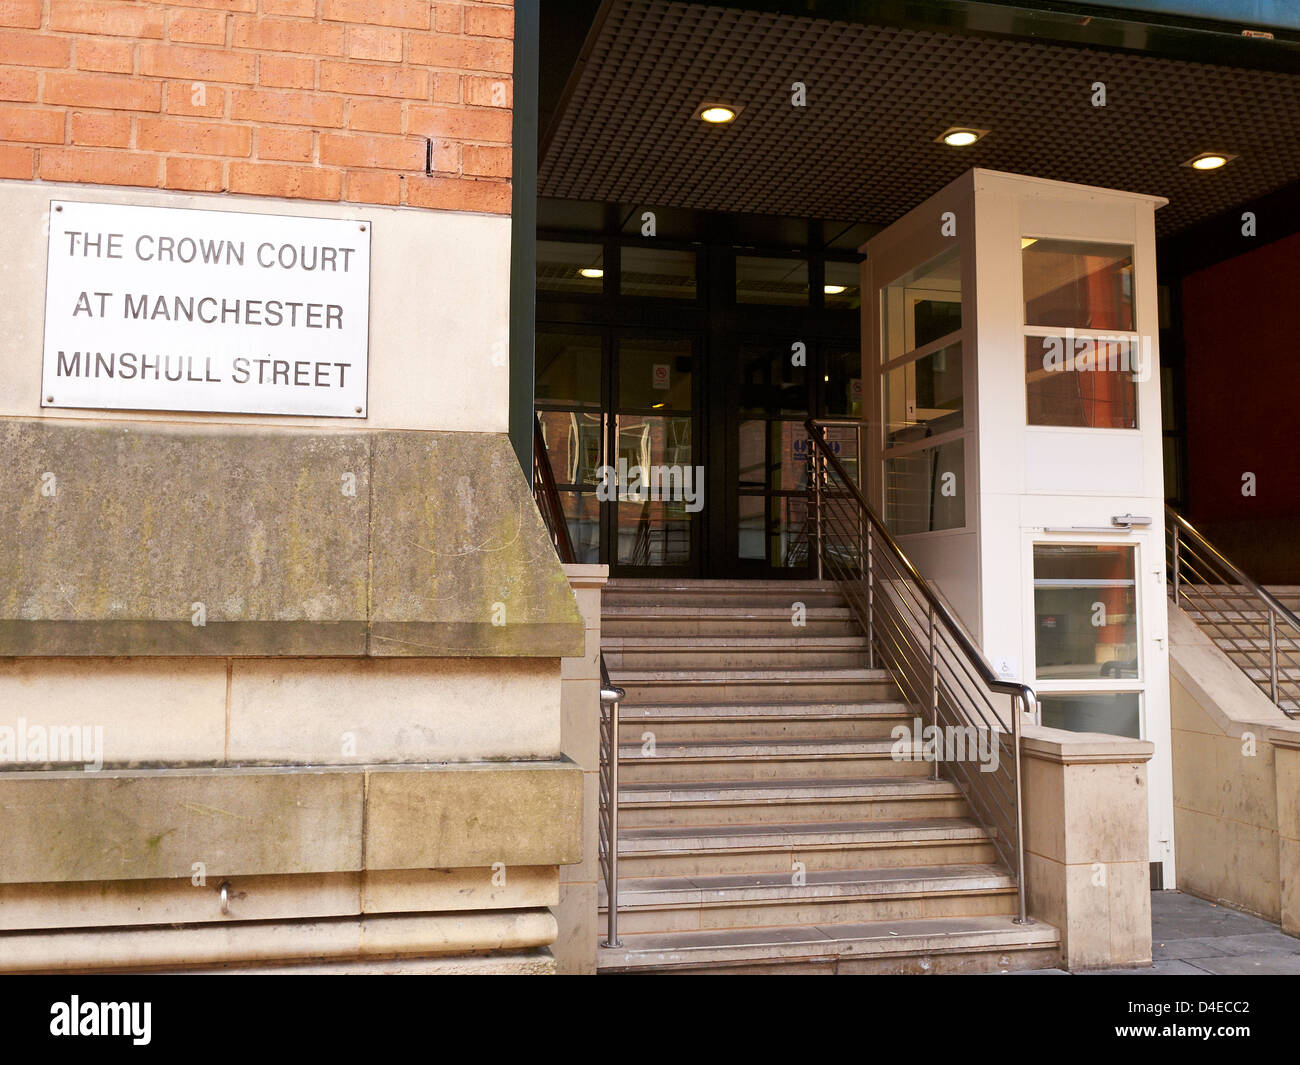 The Crown Court at Manchester Minshull Street, Manchester UK Stock Photo